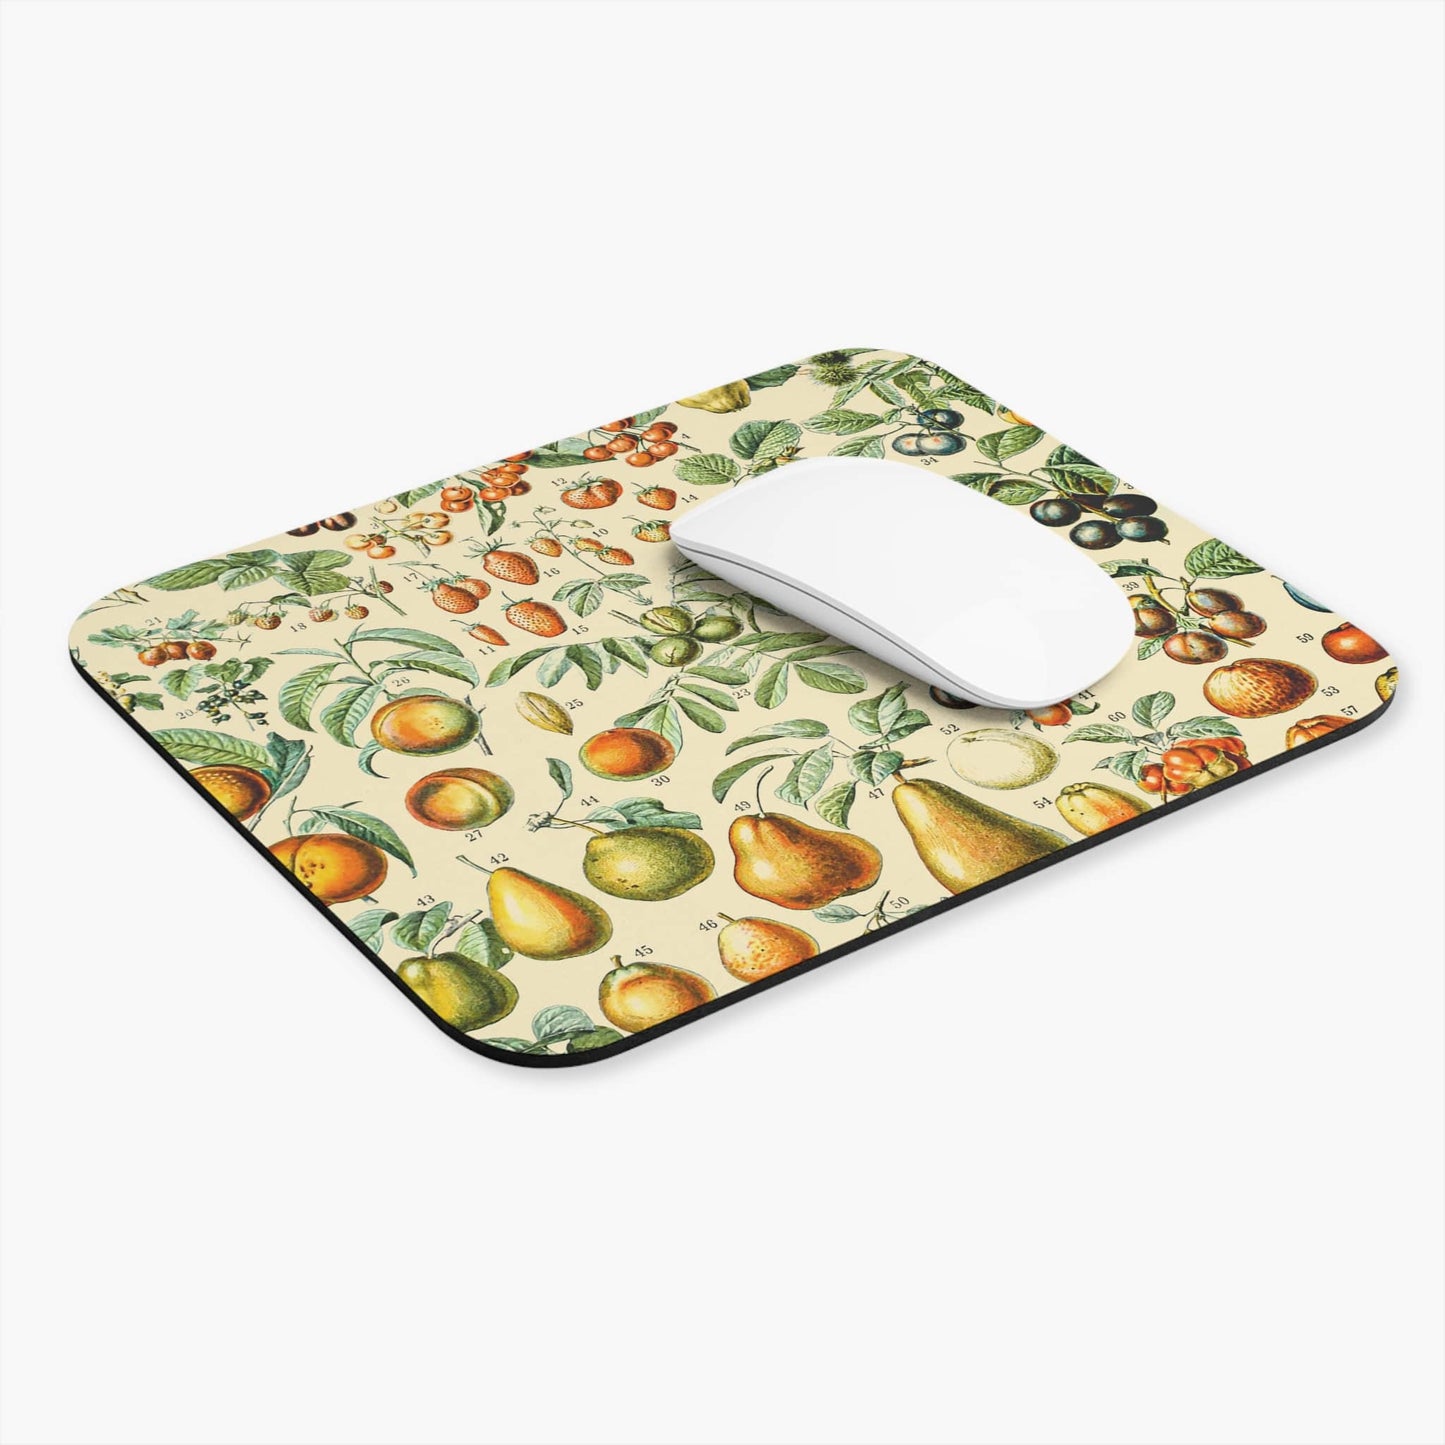 All Sorts of Fruits Computer Desk Mouse Pad With White Mouse